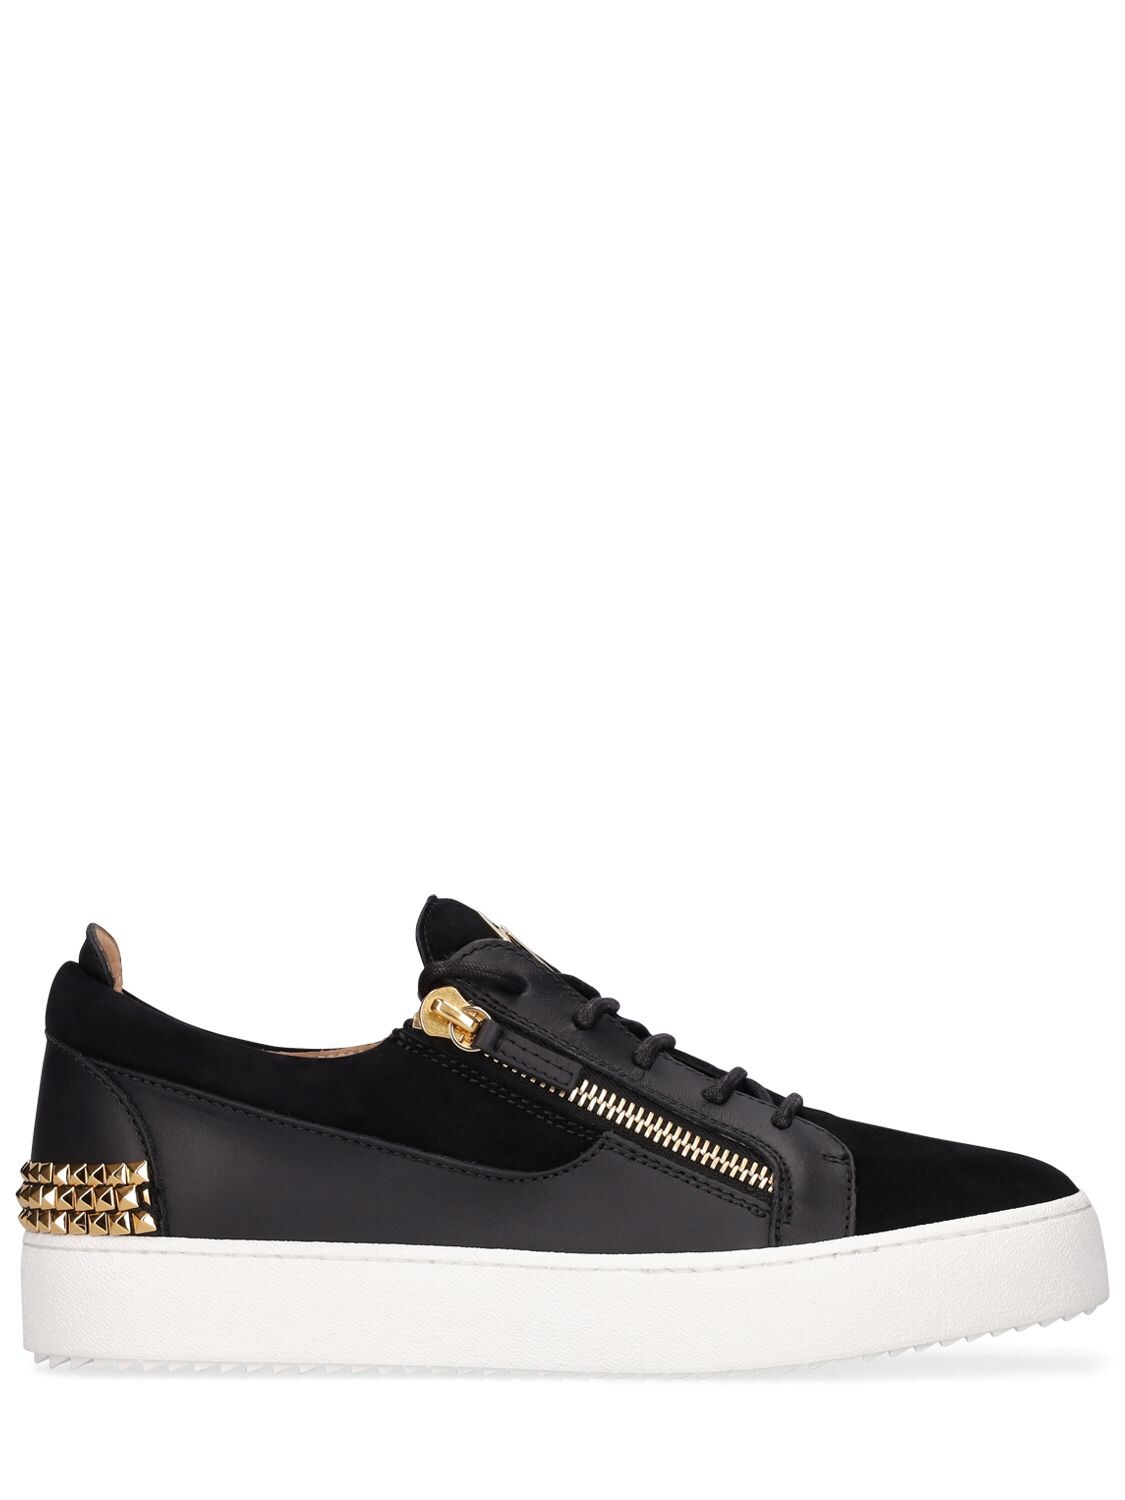 GIUSEPPE ZANOTTI MAY LONDON SUEDE & LEATHER SNEAKERS